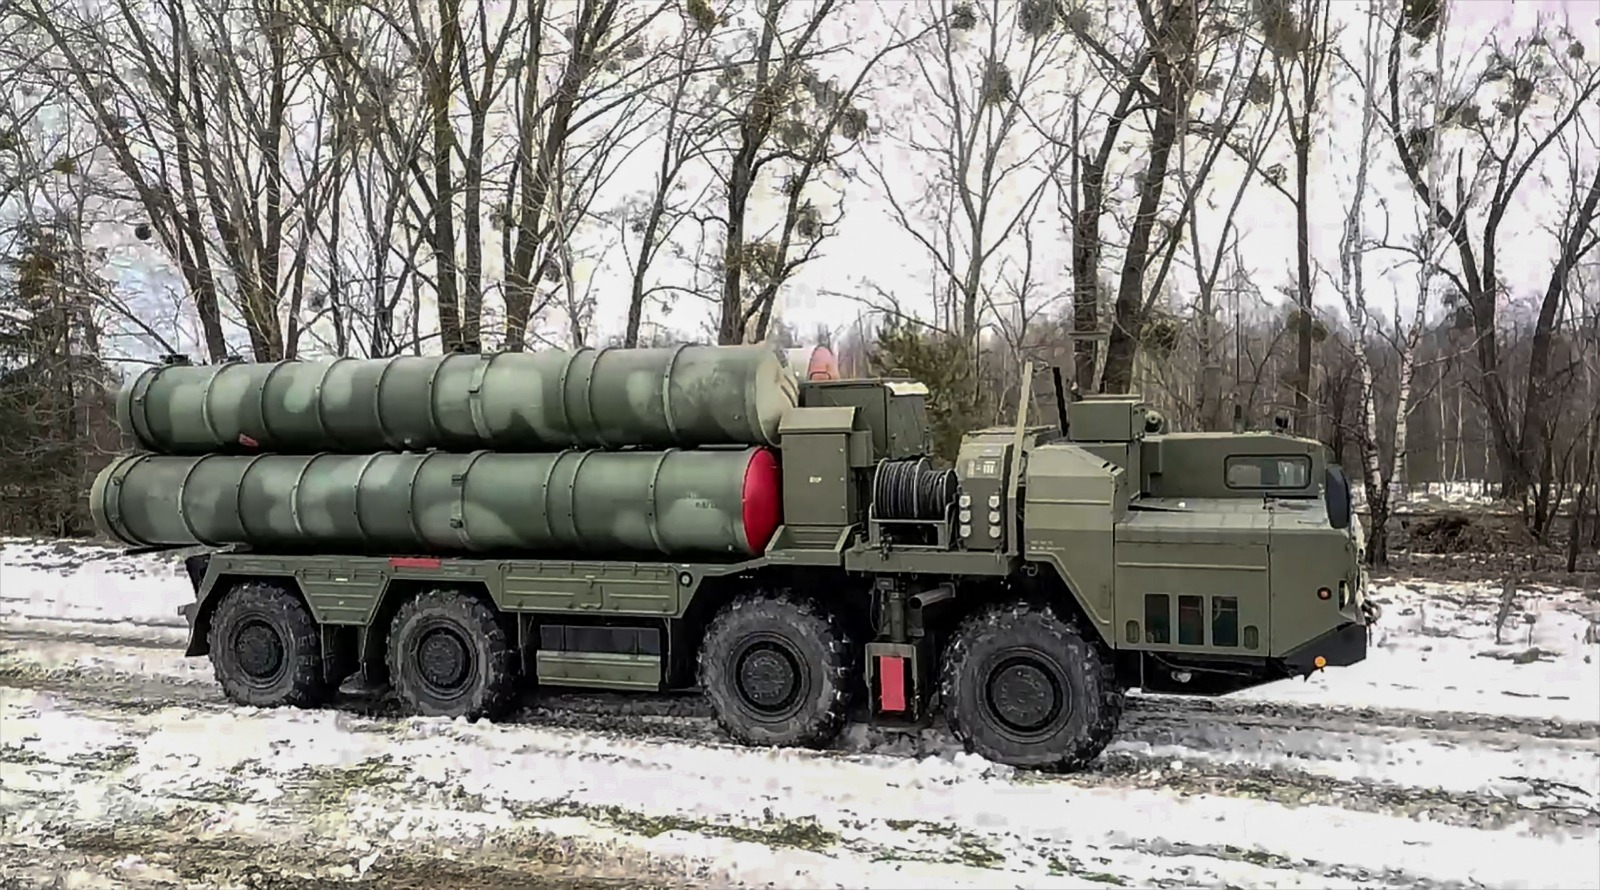 This handout video grab shows combat crews of the S-400 air defense system driving during joint exercises of the armed forces of Russia and Belarus as part of an inspection of the Union State’s Response Force, at a firing range in Brest region of Belarus. - AFP